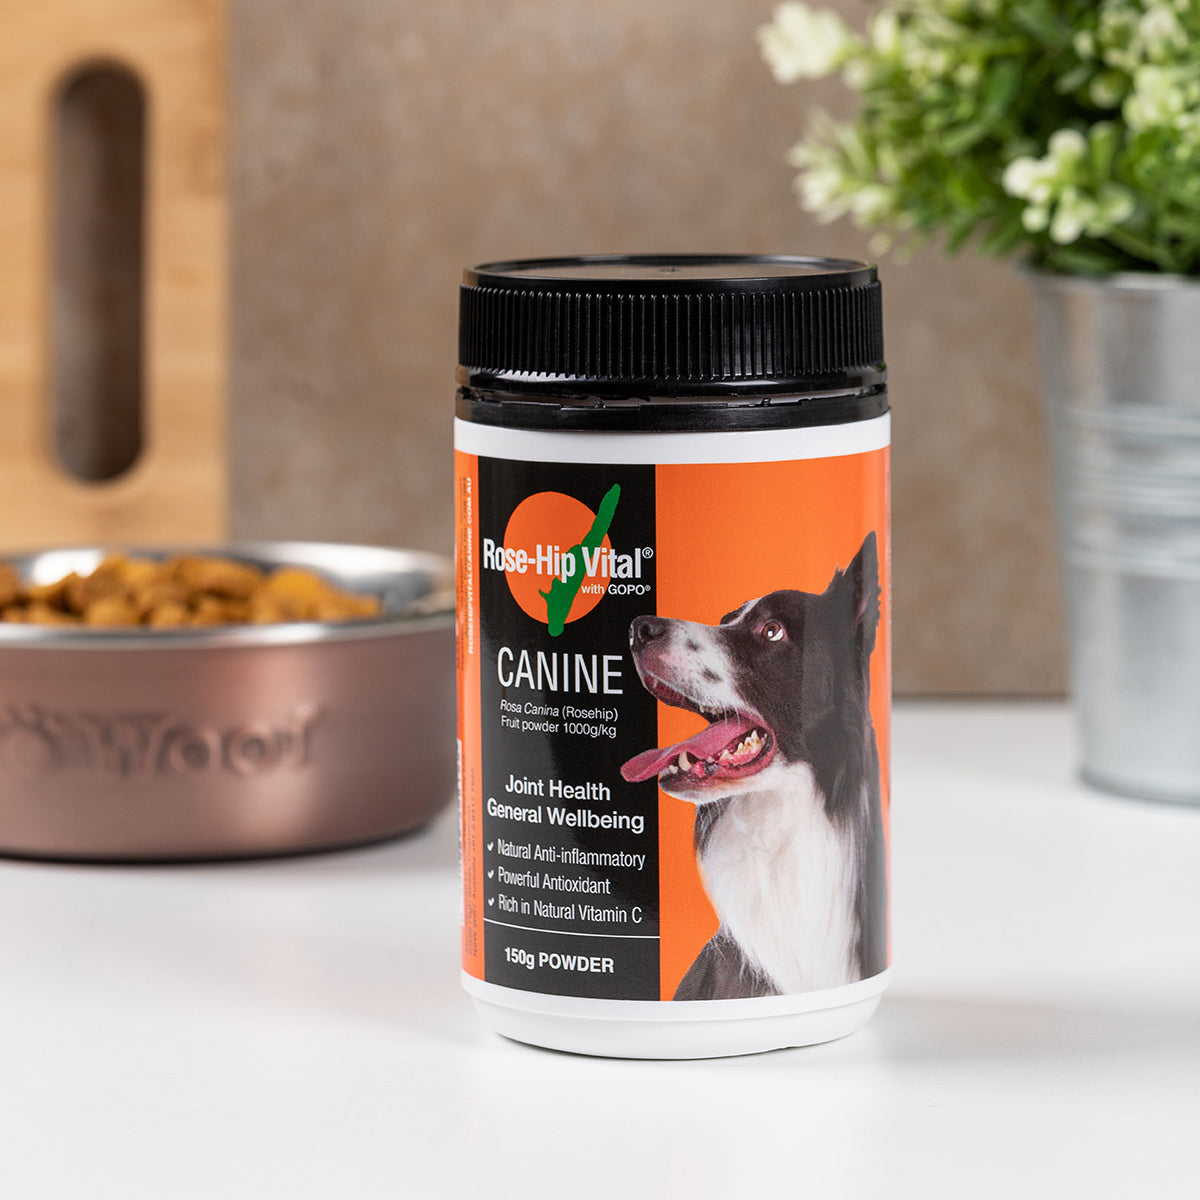 Rose-Hip Vital Canine 150g | Joint Health &amp; Wellbeing | For your dog